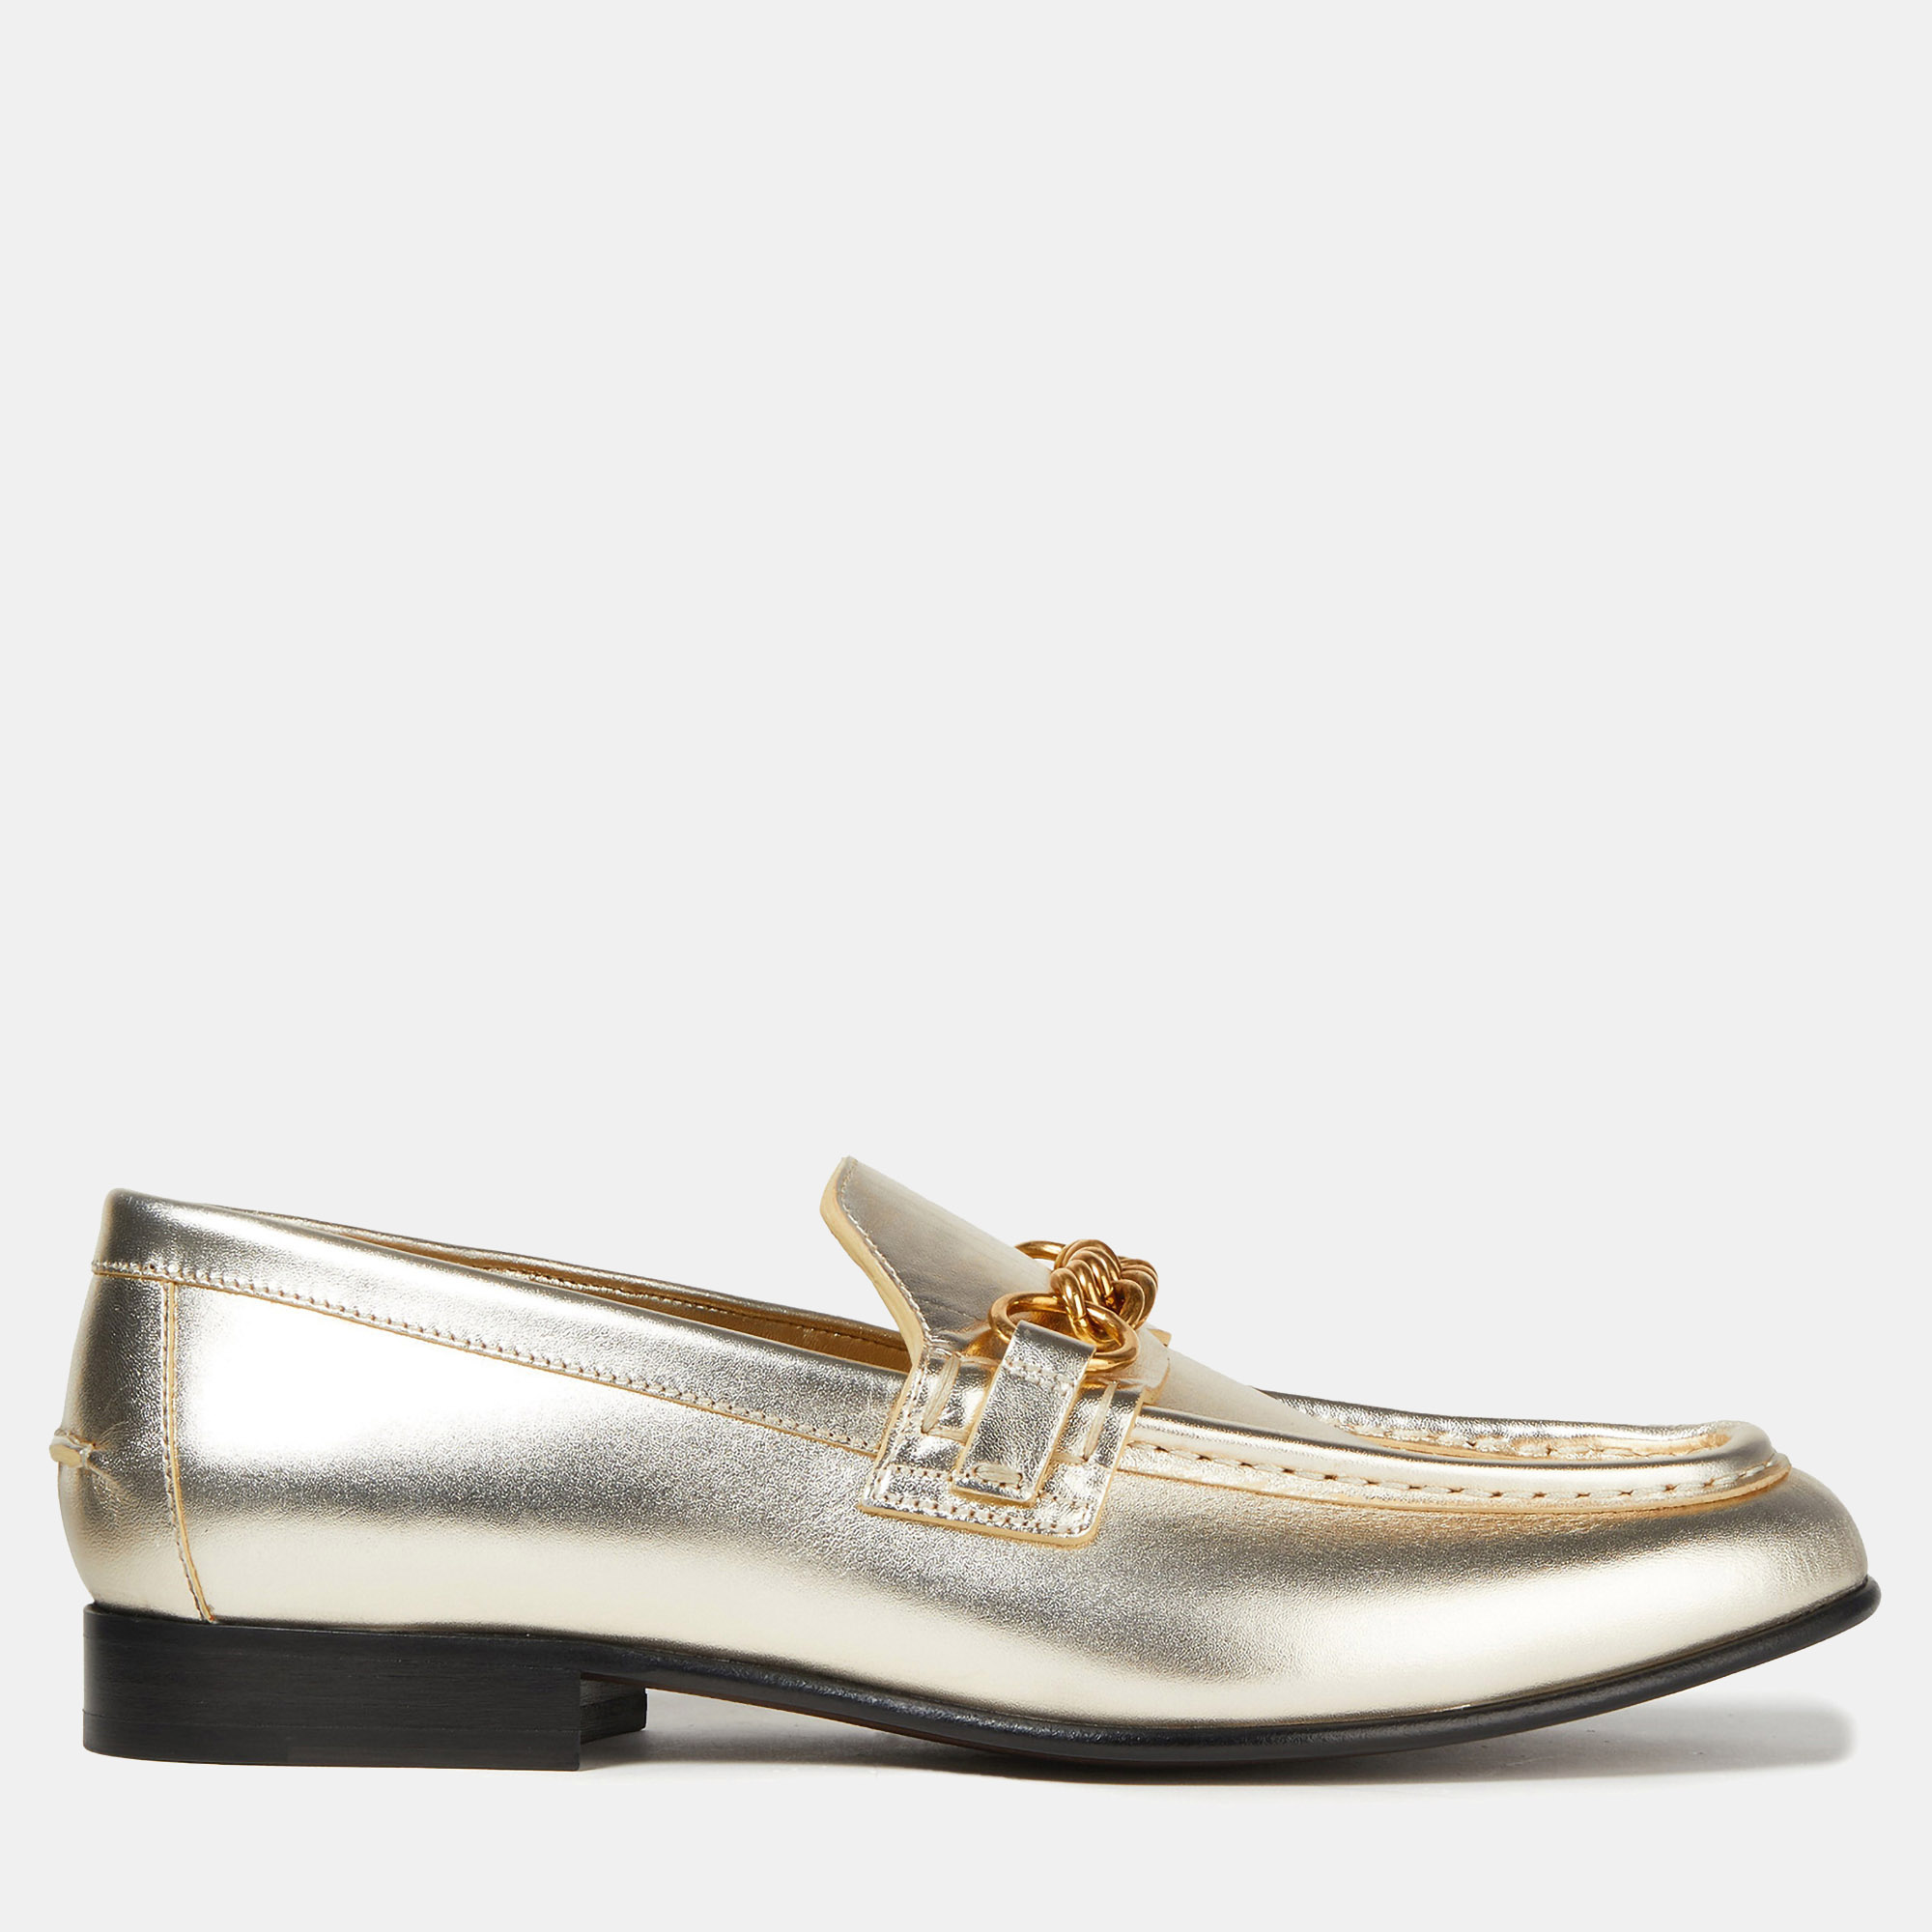 Burberry gold leather chain loafers 36